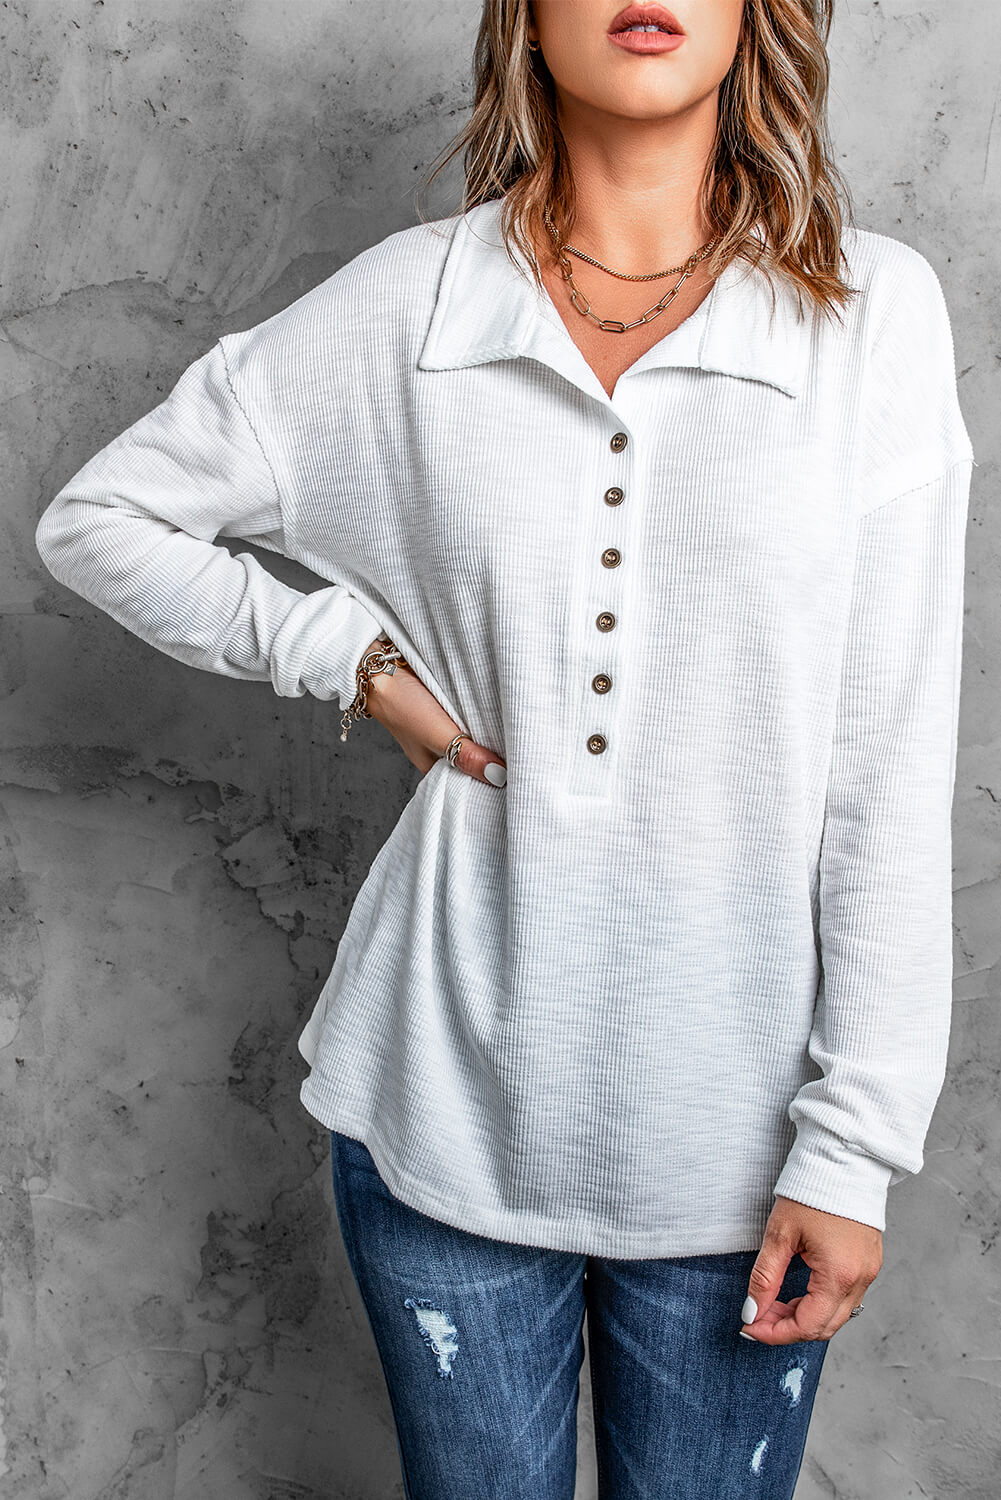 Half Button Collared Knit Top - Apparel & Accessories Girl Code